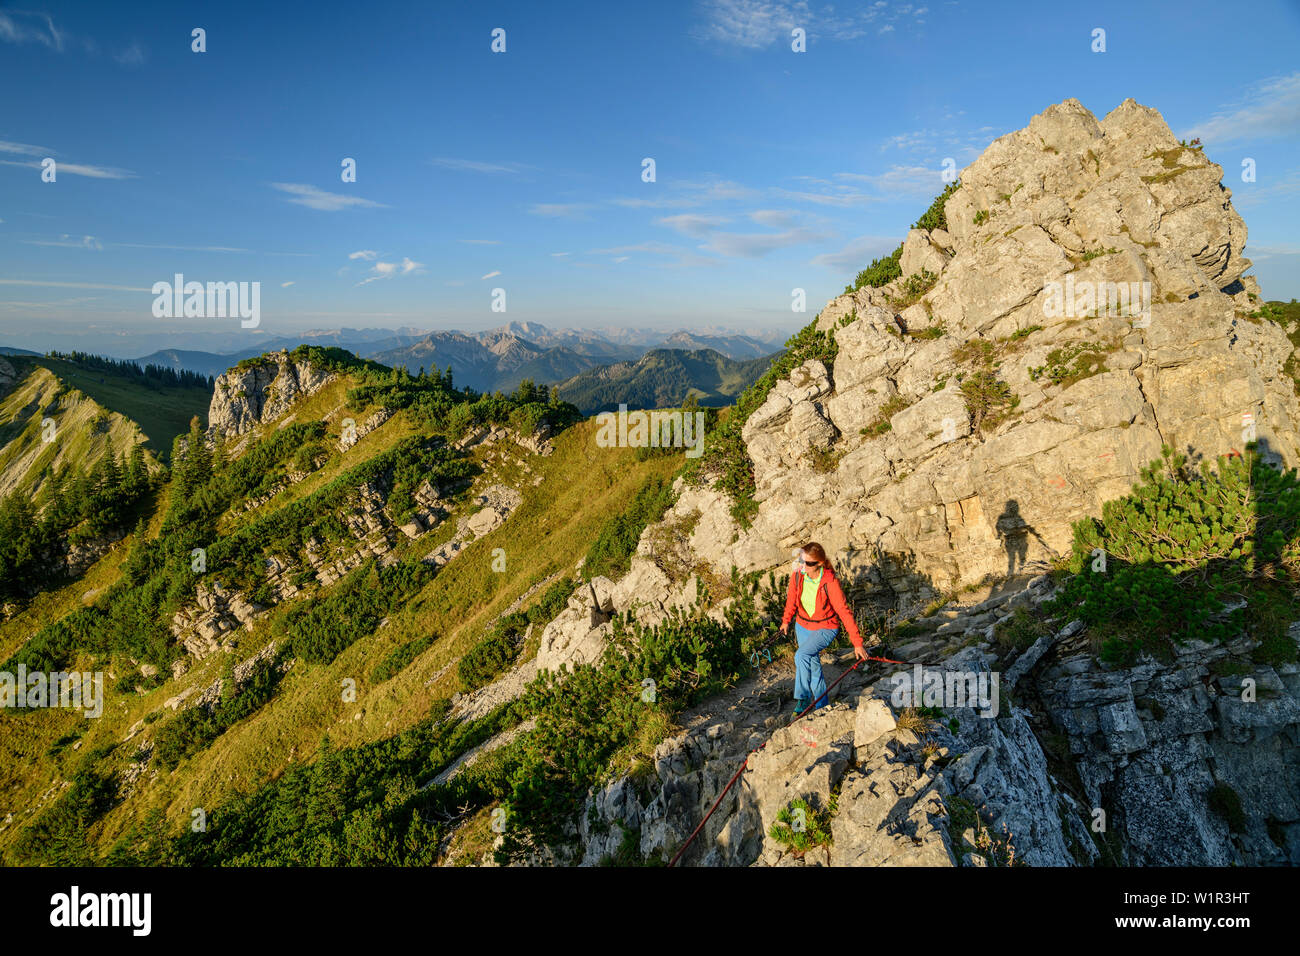 Woman while hiking rises to Aiplspitze, Aiplspitze, Mangfall Mountains, the Bavarian Alps, Upper Bavaria, Bavaria, Germany Stock Photo